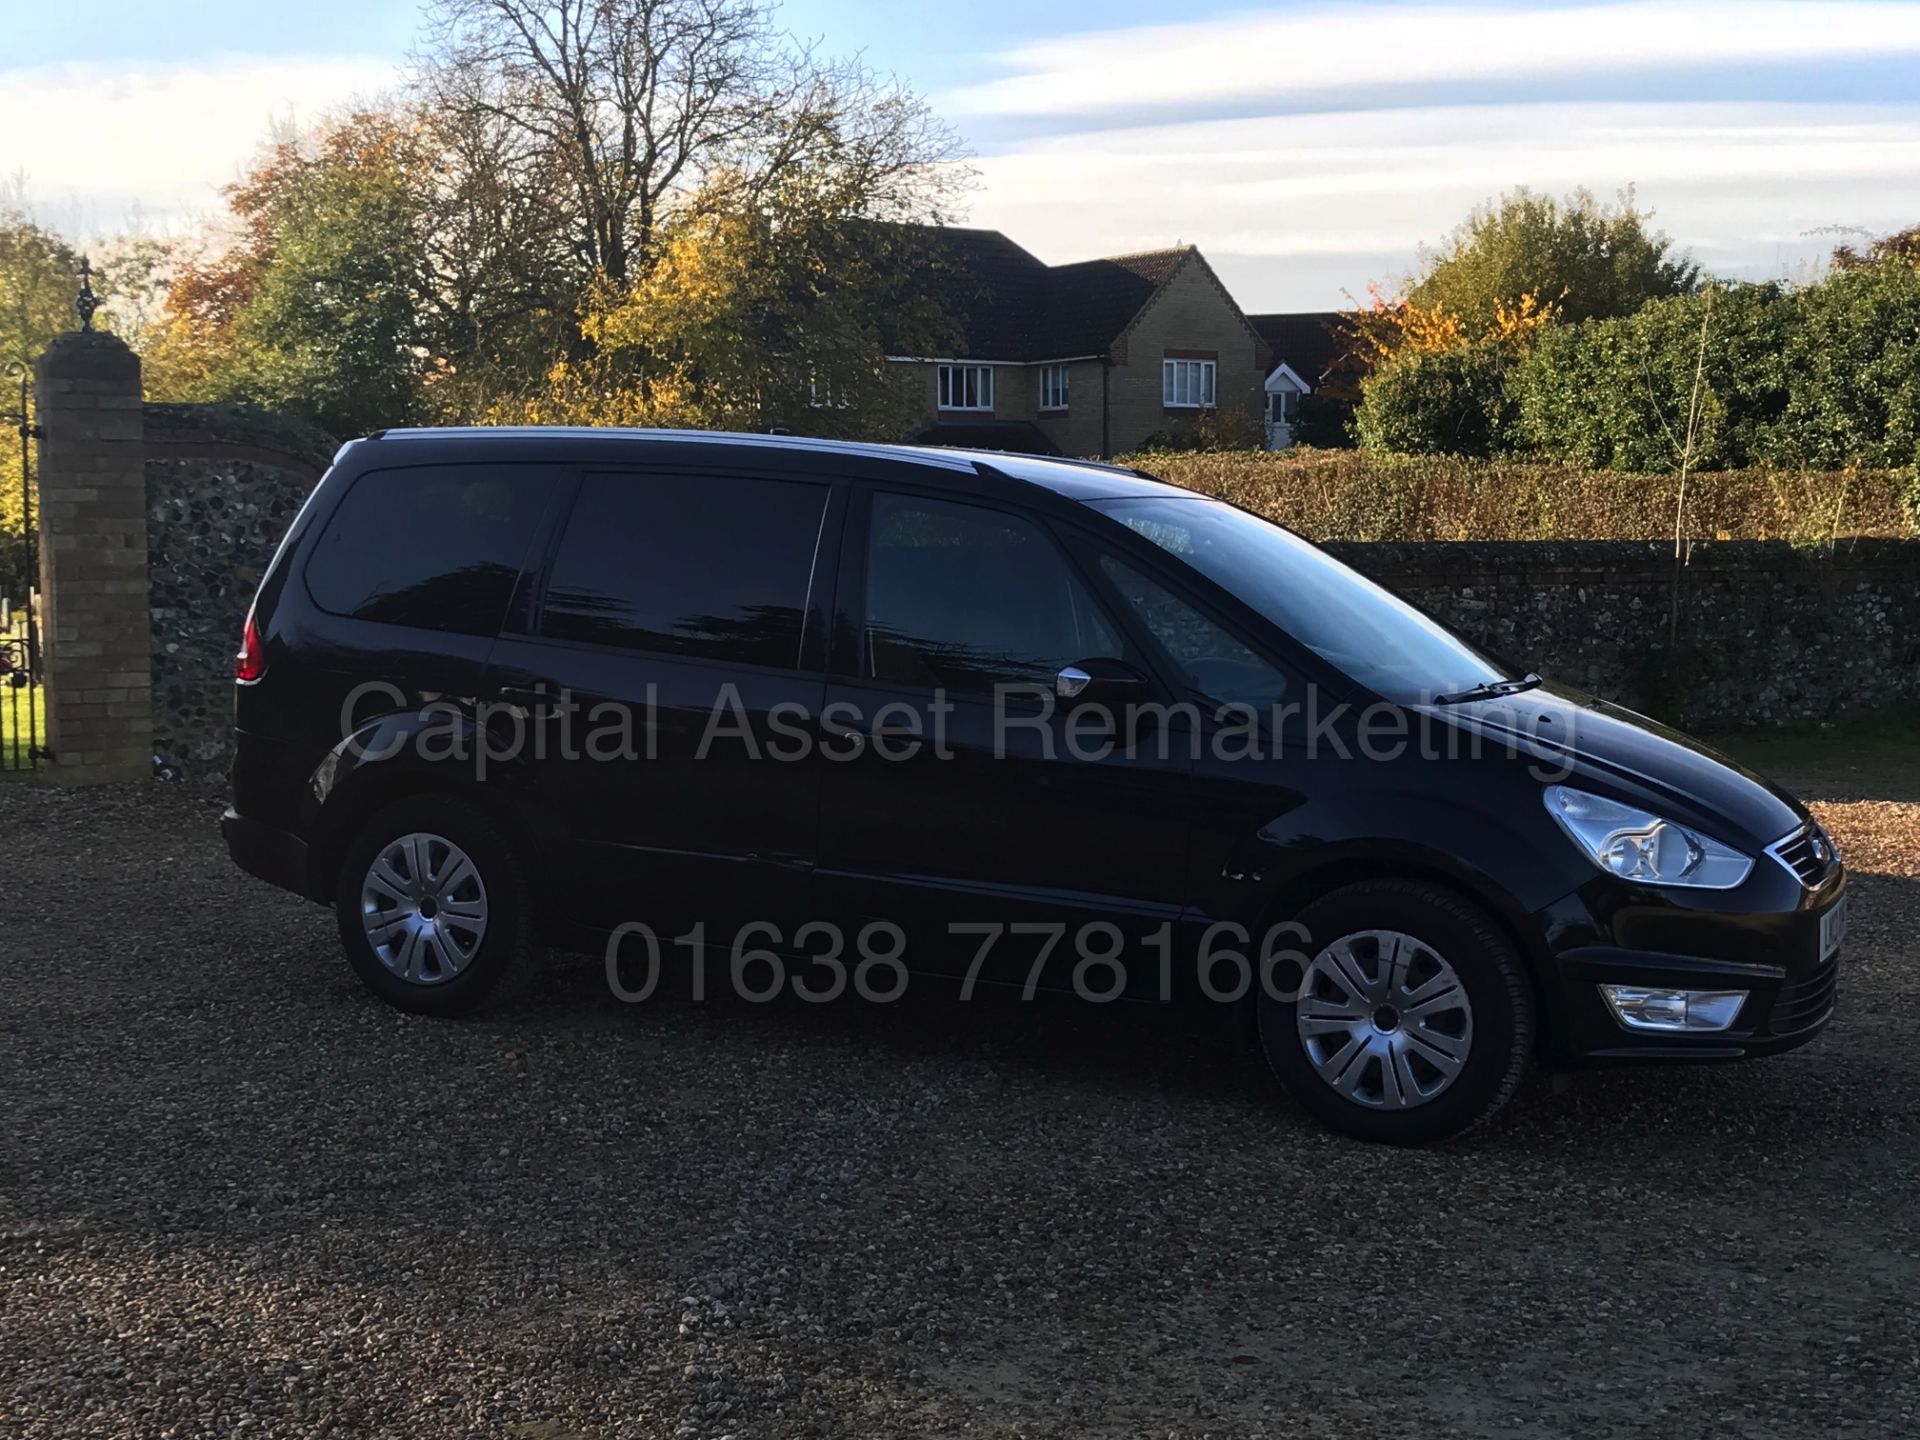 (On Sale) FORD GALAXY 'ZETEC' 7 SEATER MPV (2013) '2.0 TDCI -140 BHP' (1 OWNER) *FULL HISTORY* - Image 3 of 29